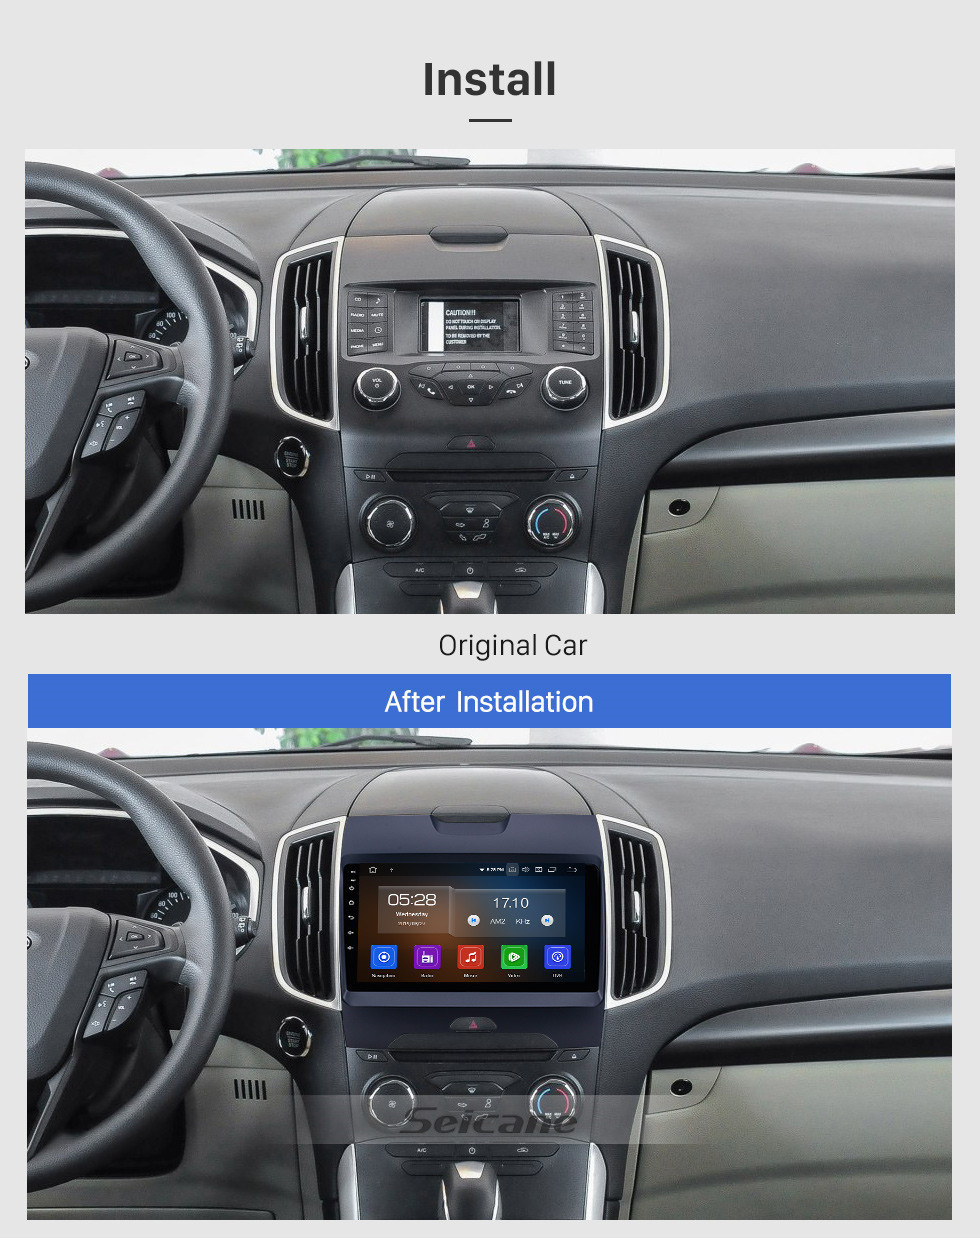 Seicane HD Touchscreen 10.1 inch Android 11.0 for 2007-2010 Ford Mondeo Zhisheng Manual A/C Radio GPS Navigation System Bluetooth Carplay support Backup camera